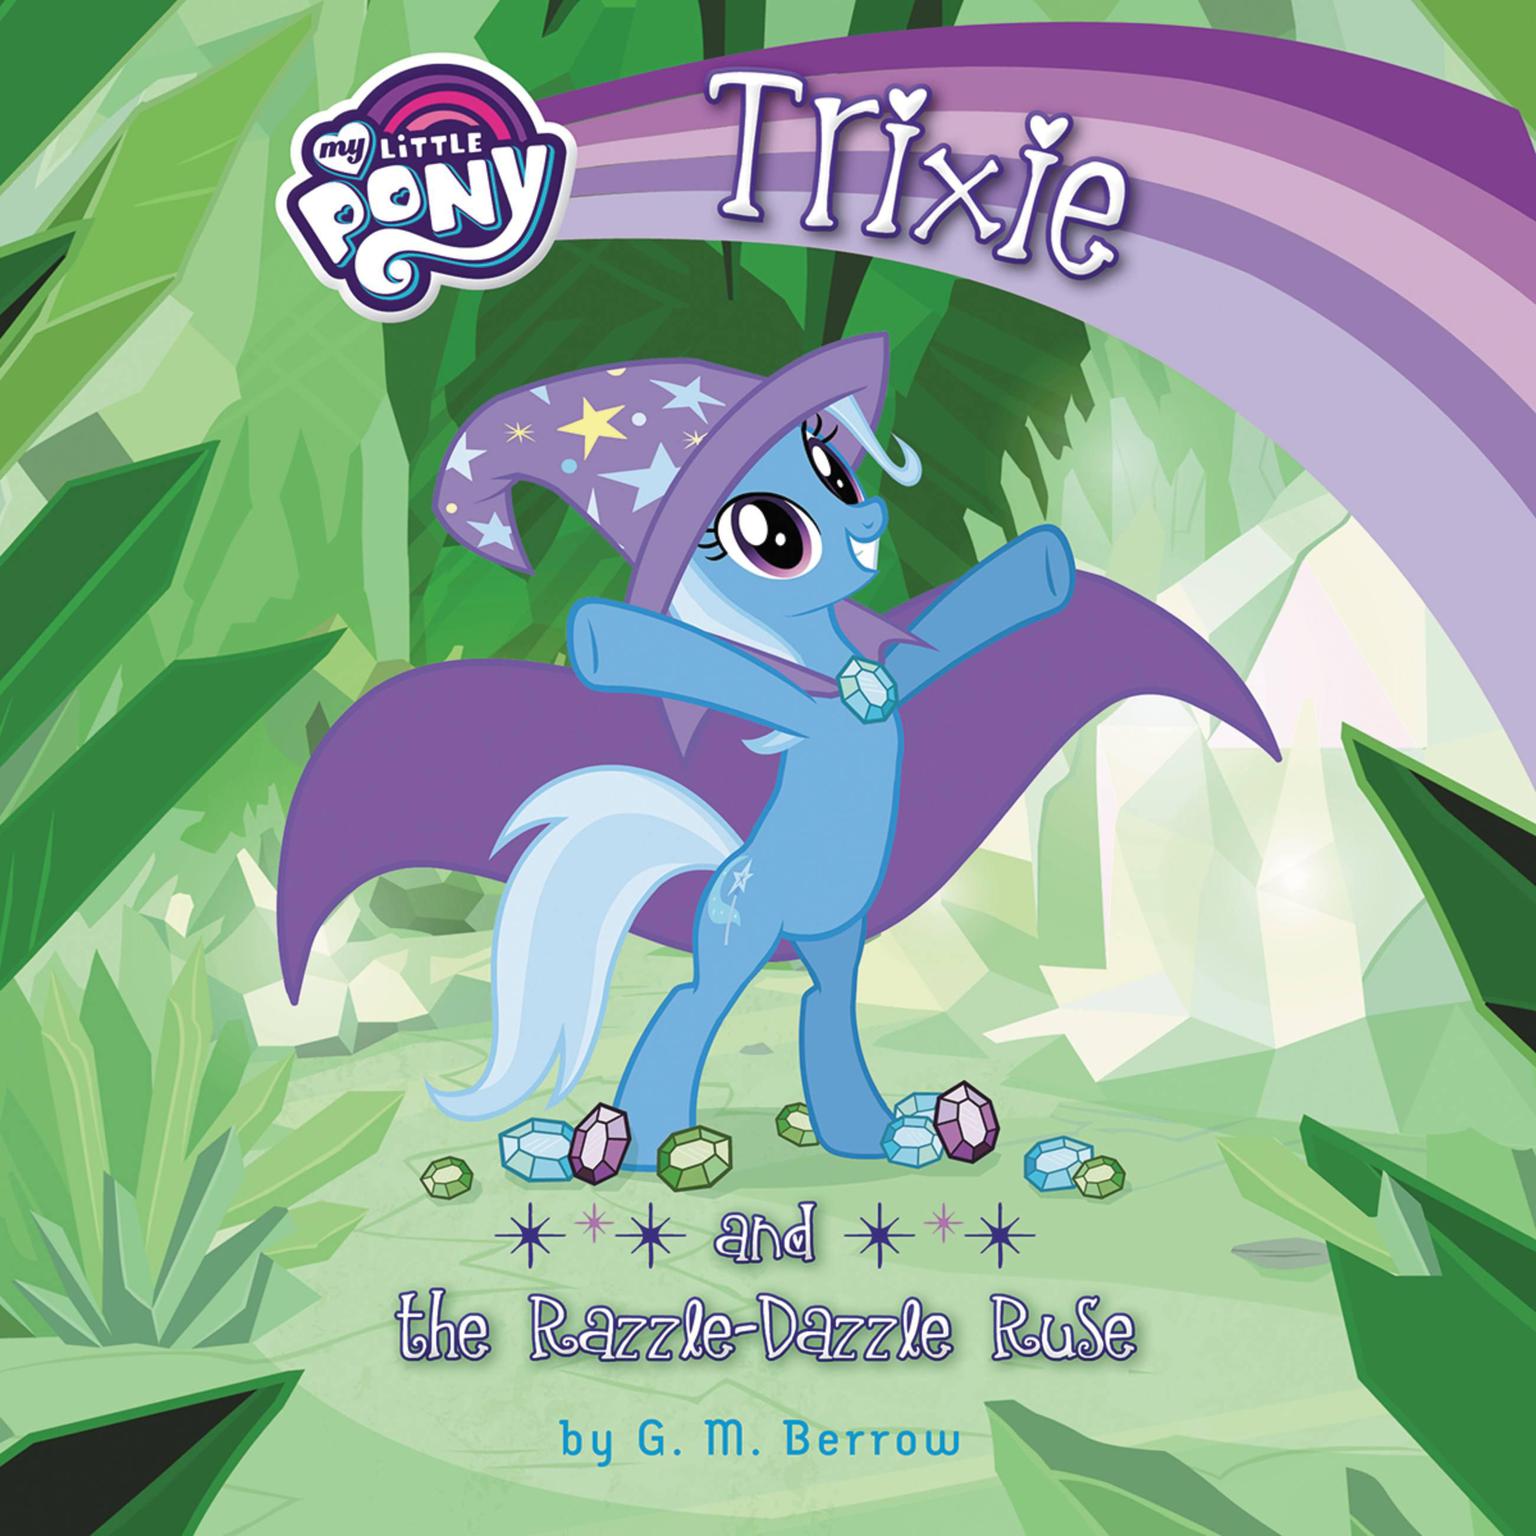 My Little Pony: Trixie and the Razzle-Dazzle Ruse Audiobook, by G. M. Berrow